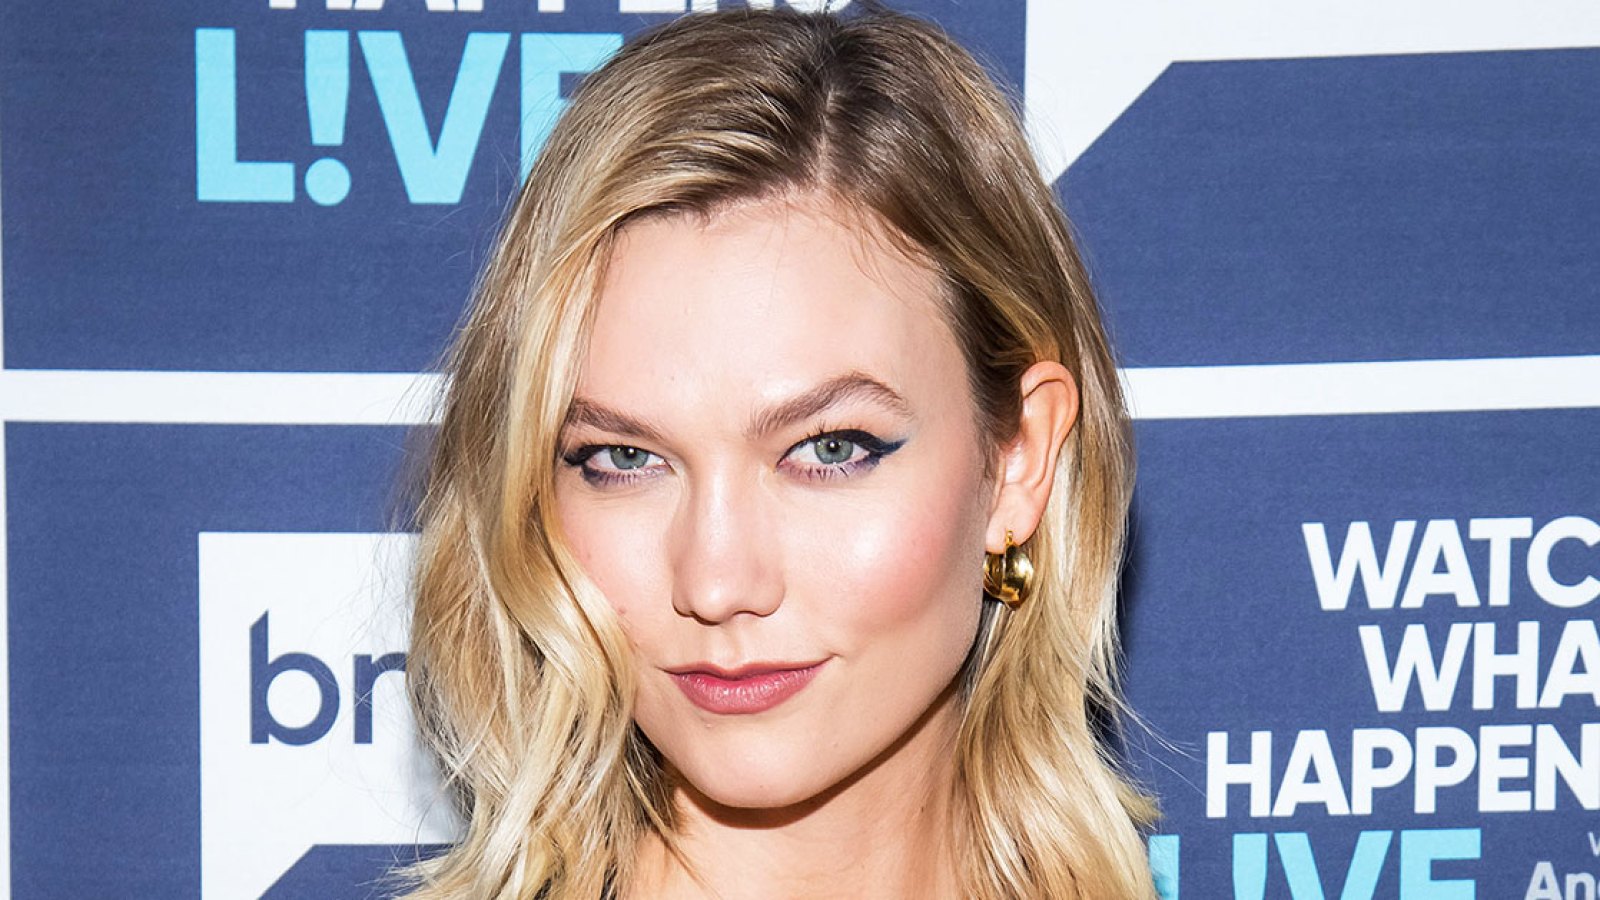 Karlie Kloss Uses a Spoon to Curl Her Lashes and It's Pure Genius